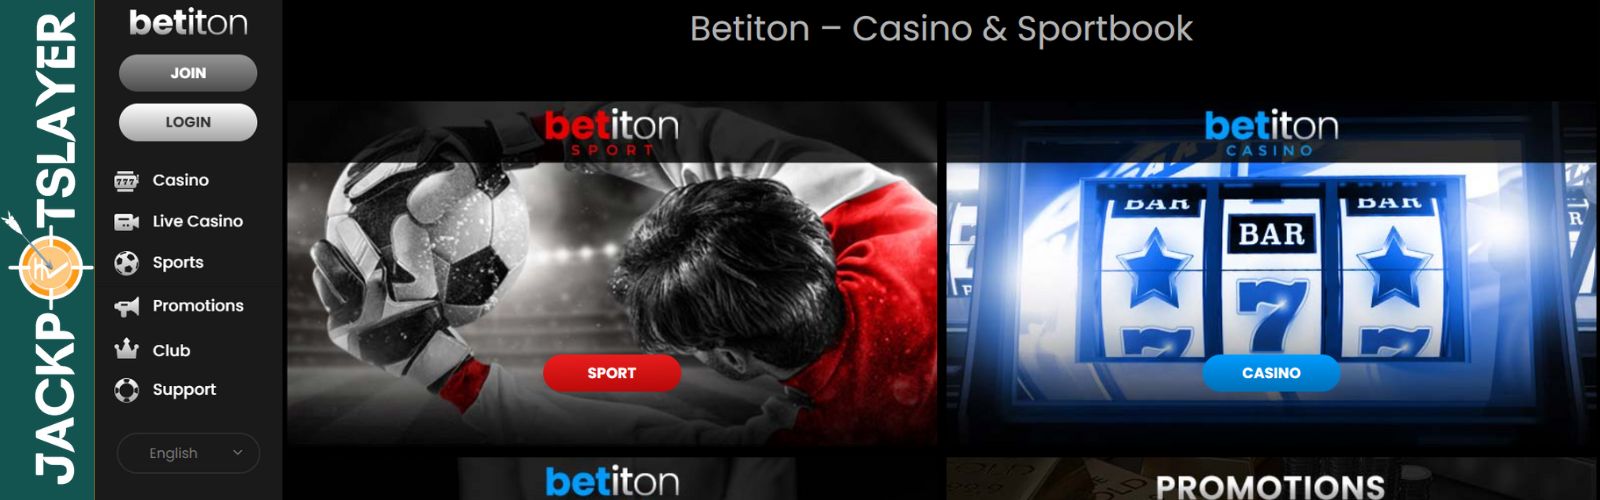 Betiton Casino and Sportsbook Online